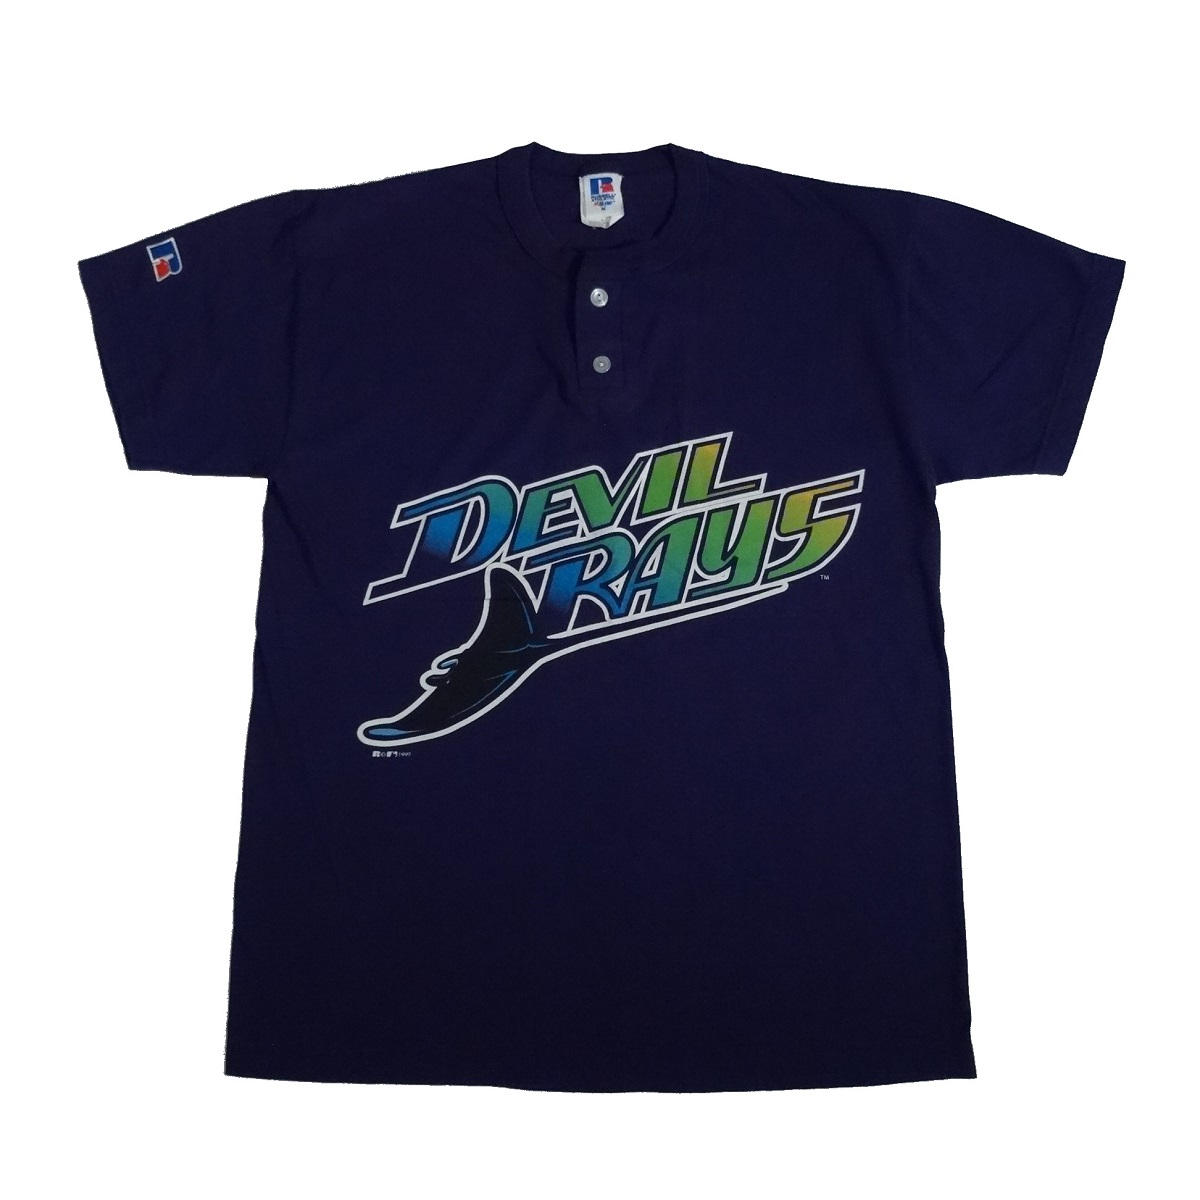 tampa bay devil rays vintage 90s shirt front